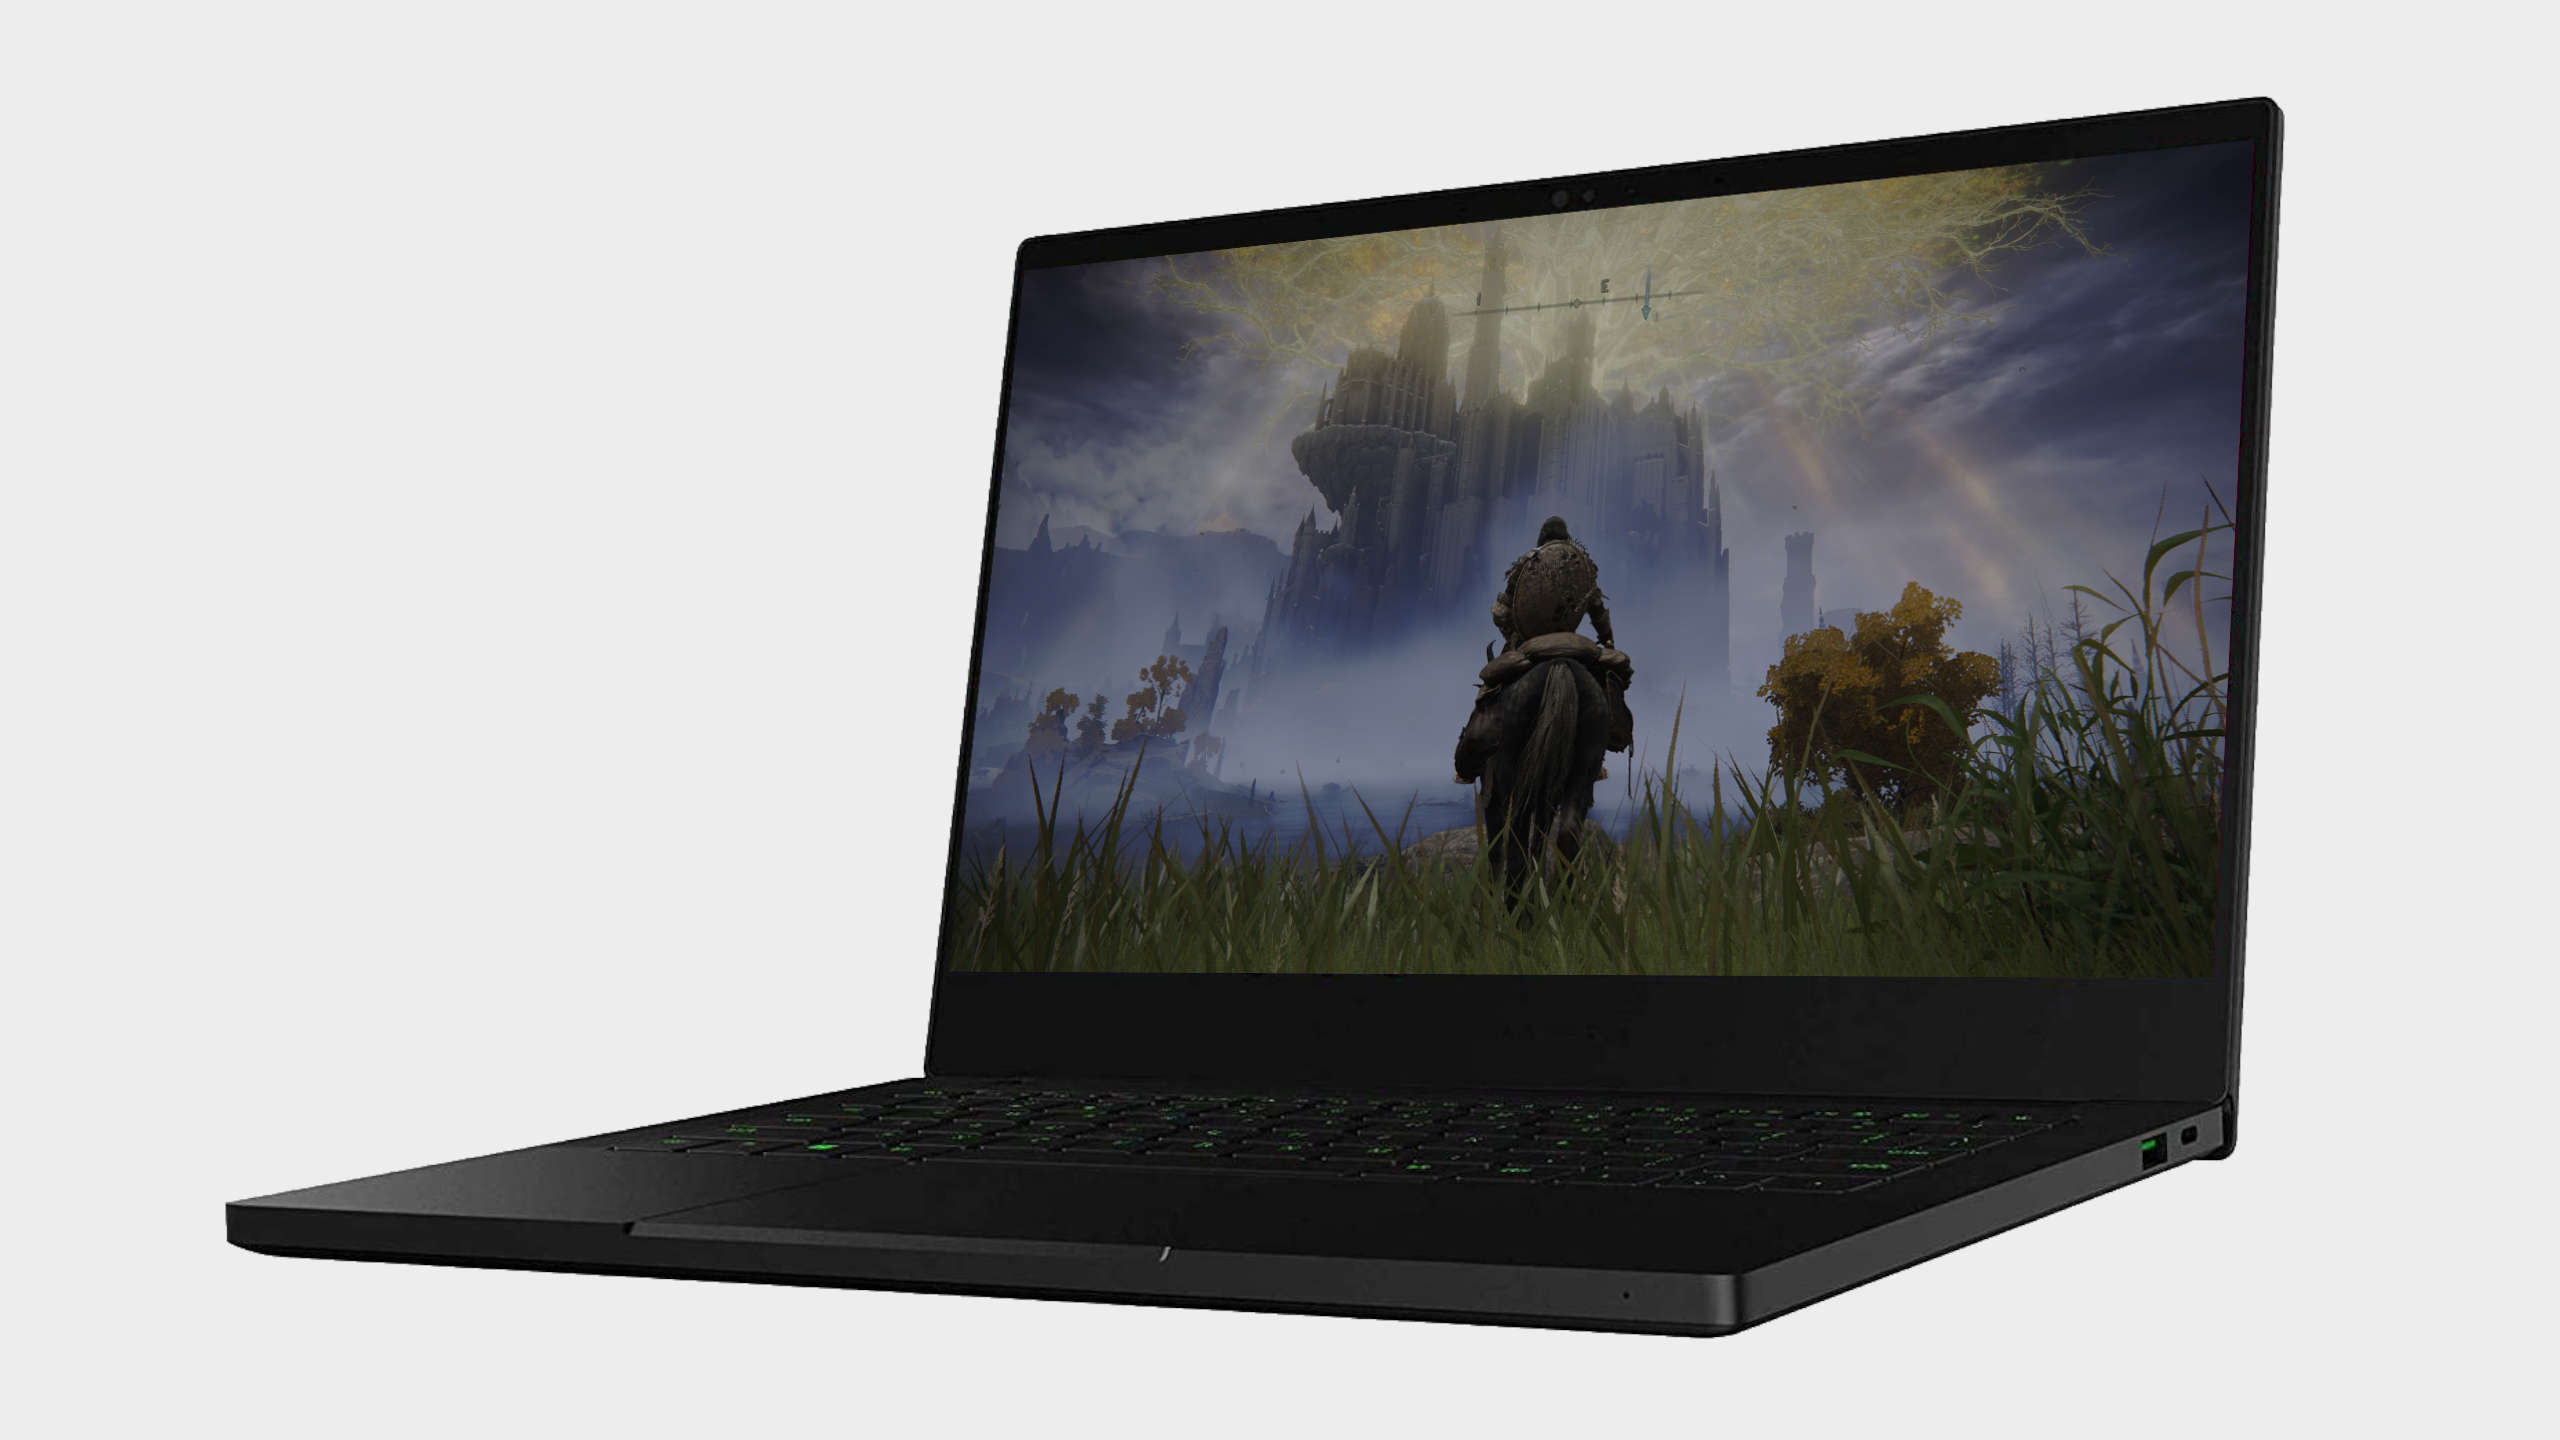 Image of Elden Ring on a Blade 13 Stealth laptop